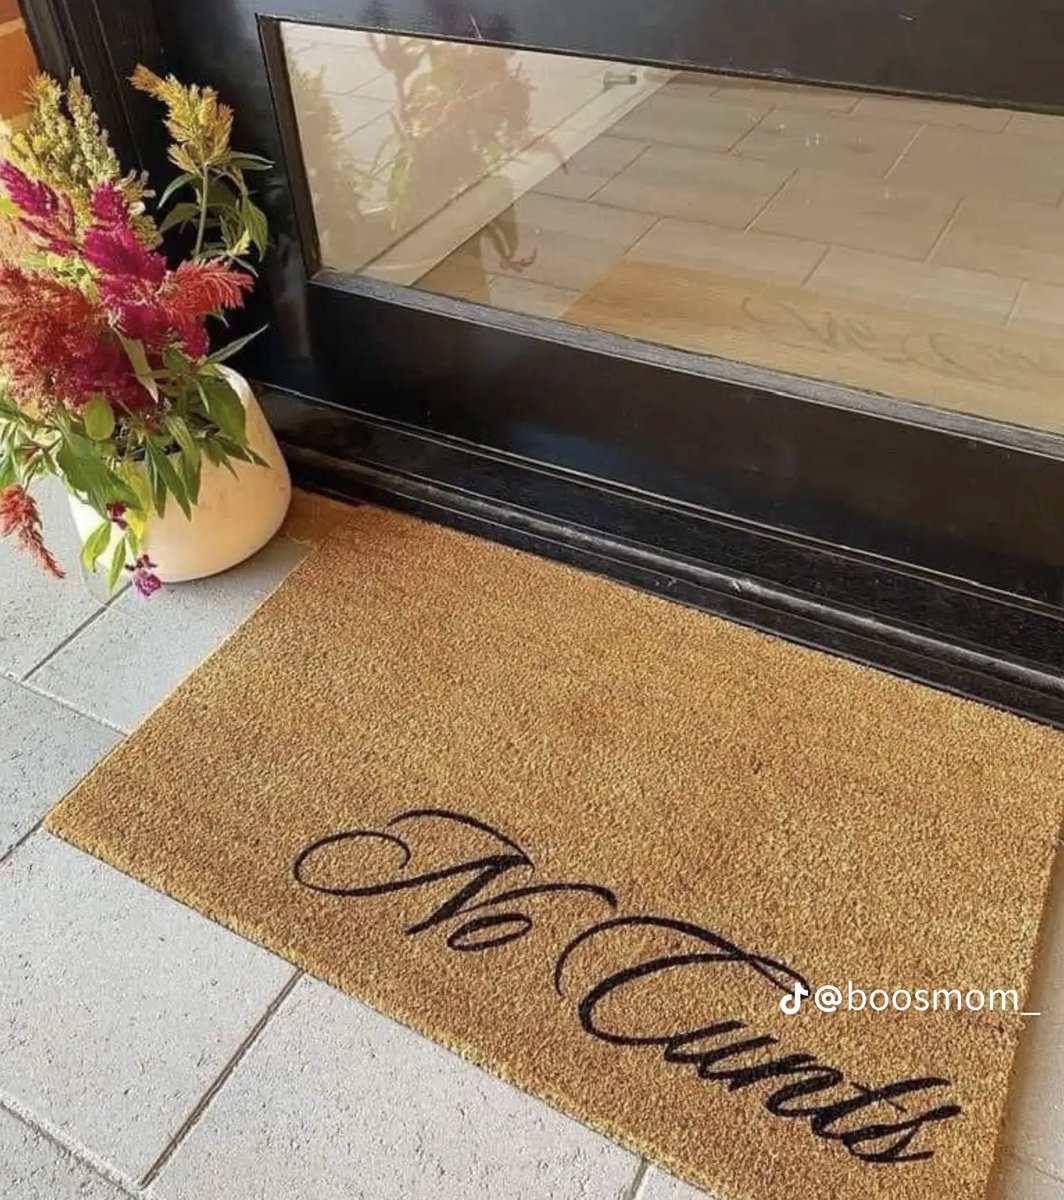 #AfternoonDelight 😭😅. I need this doormat for my 9th X account